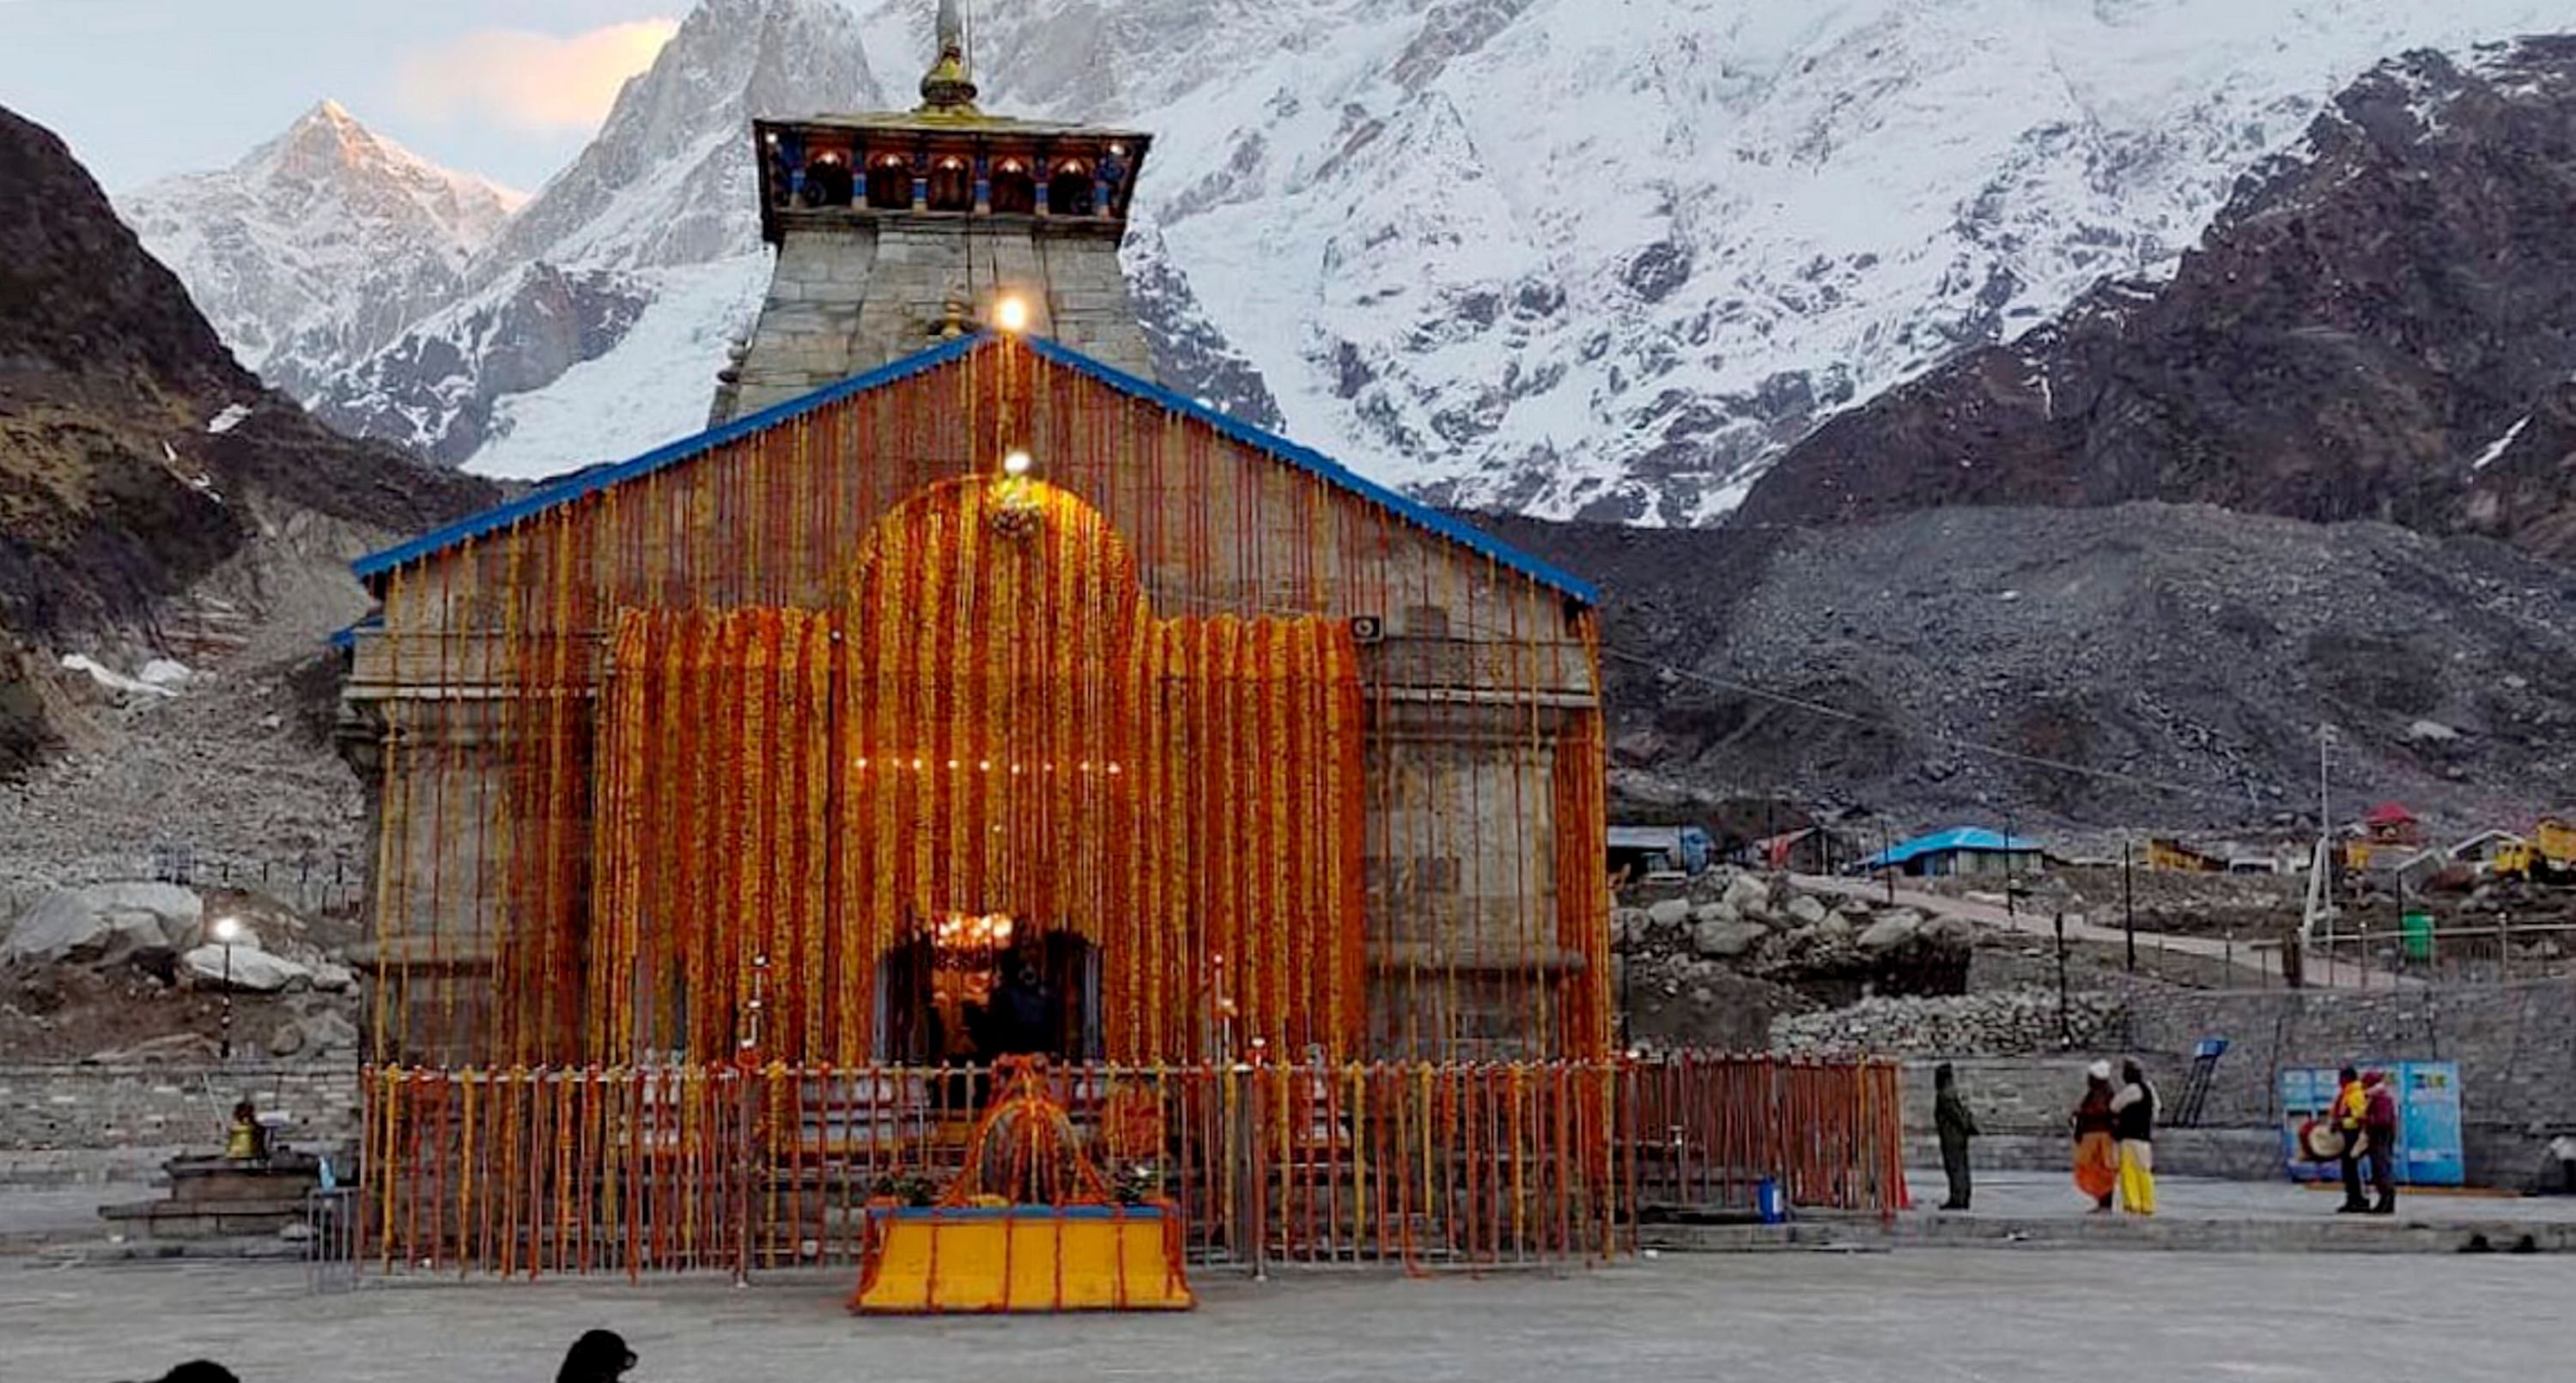 The first puja was held by priests on behalf of Prime Minister Narendra Modi as the gates of the famous Himalayan temple were opened. Credit: PTI Photo